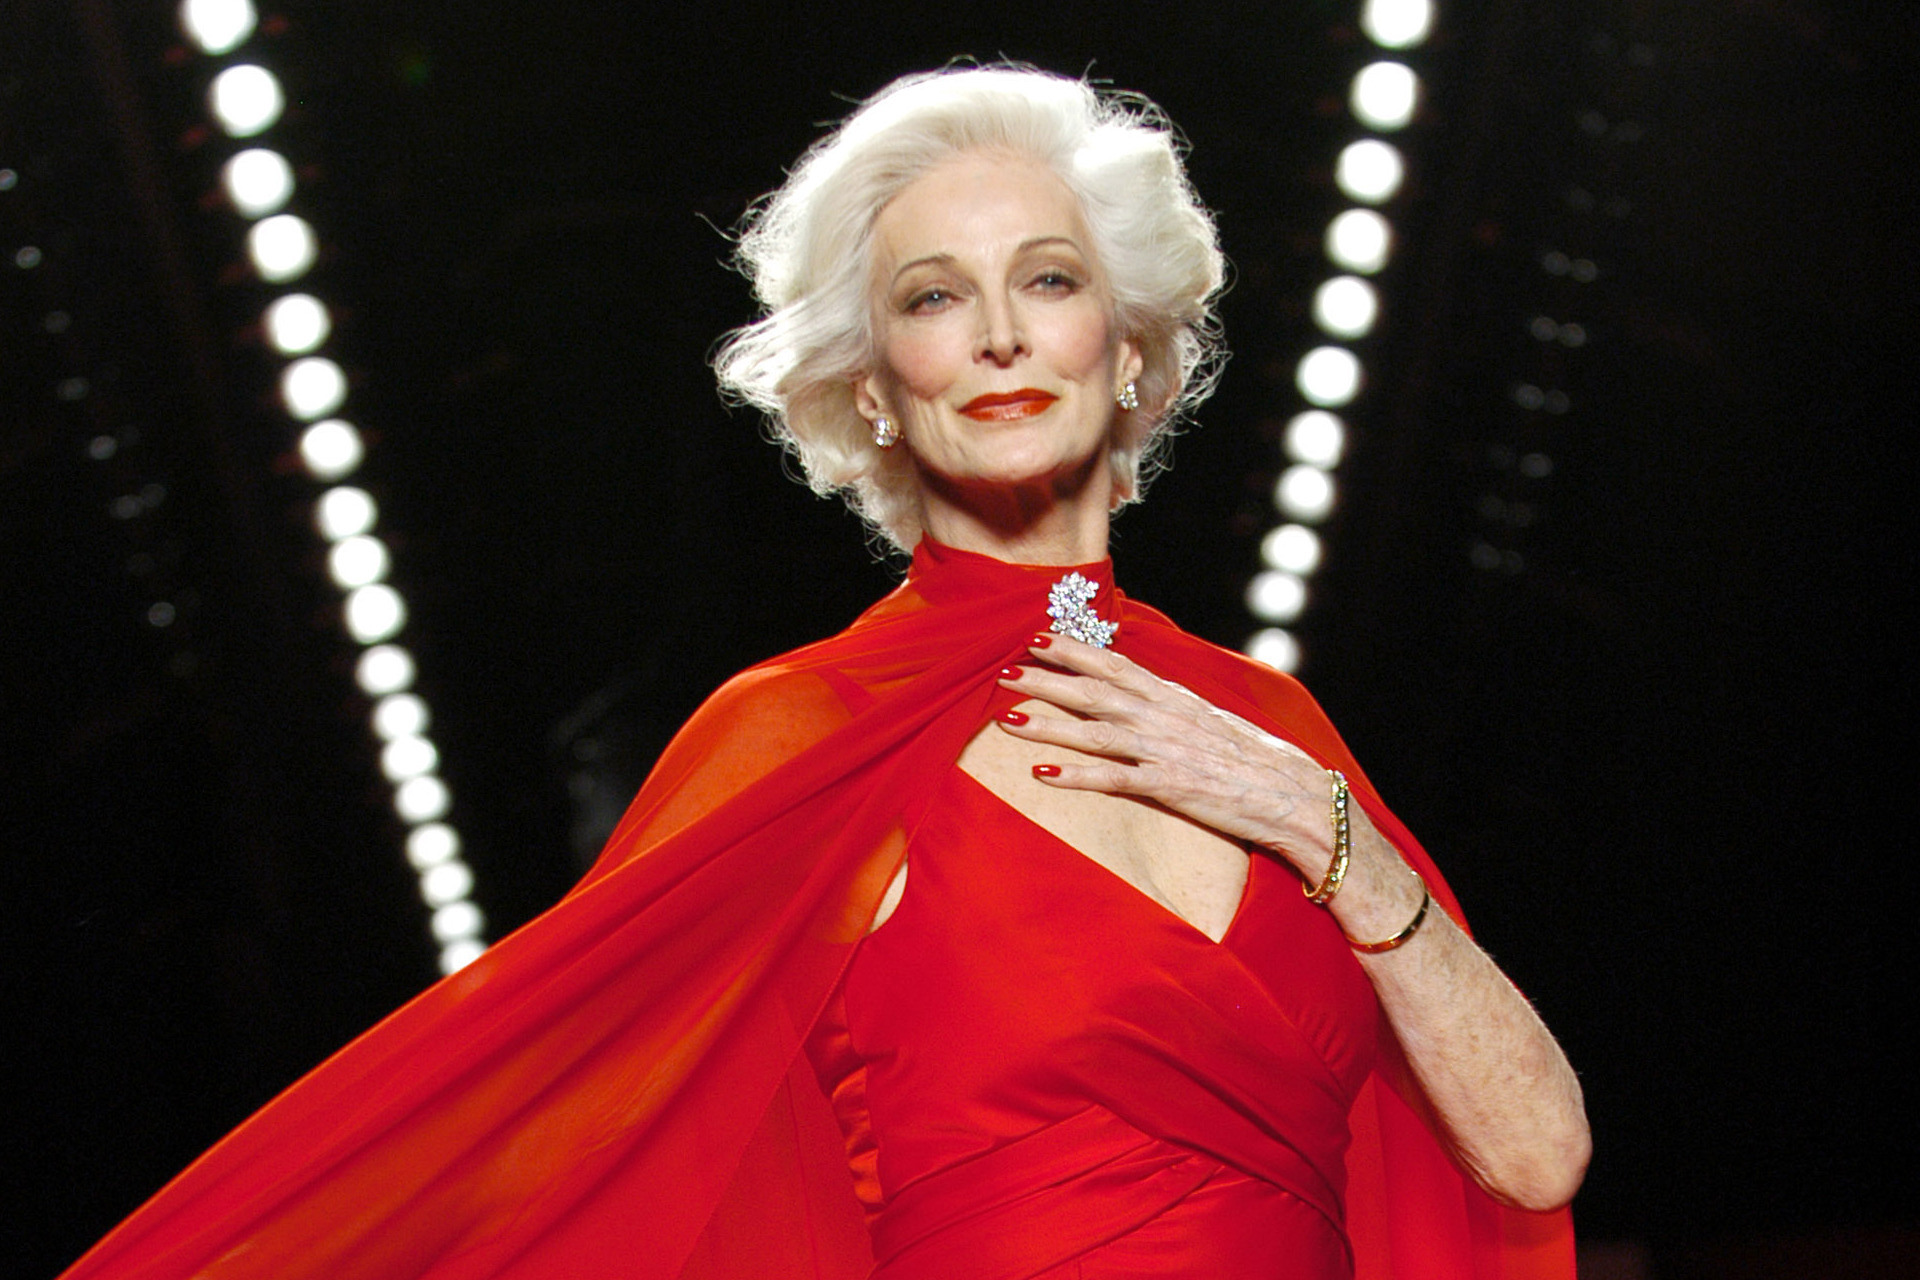 At 92, she is the longest-living supermodel in fashion history